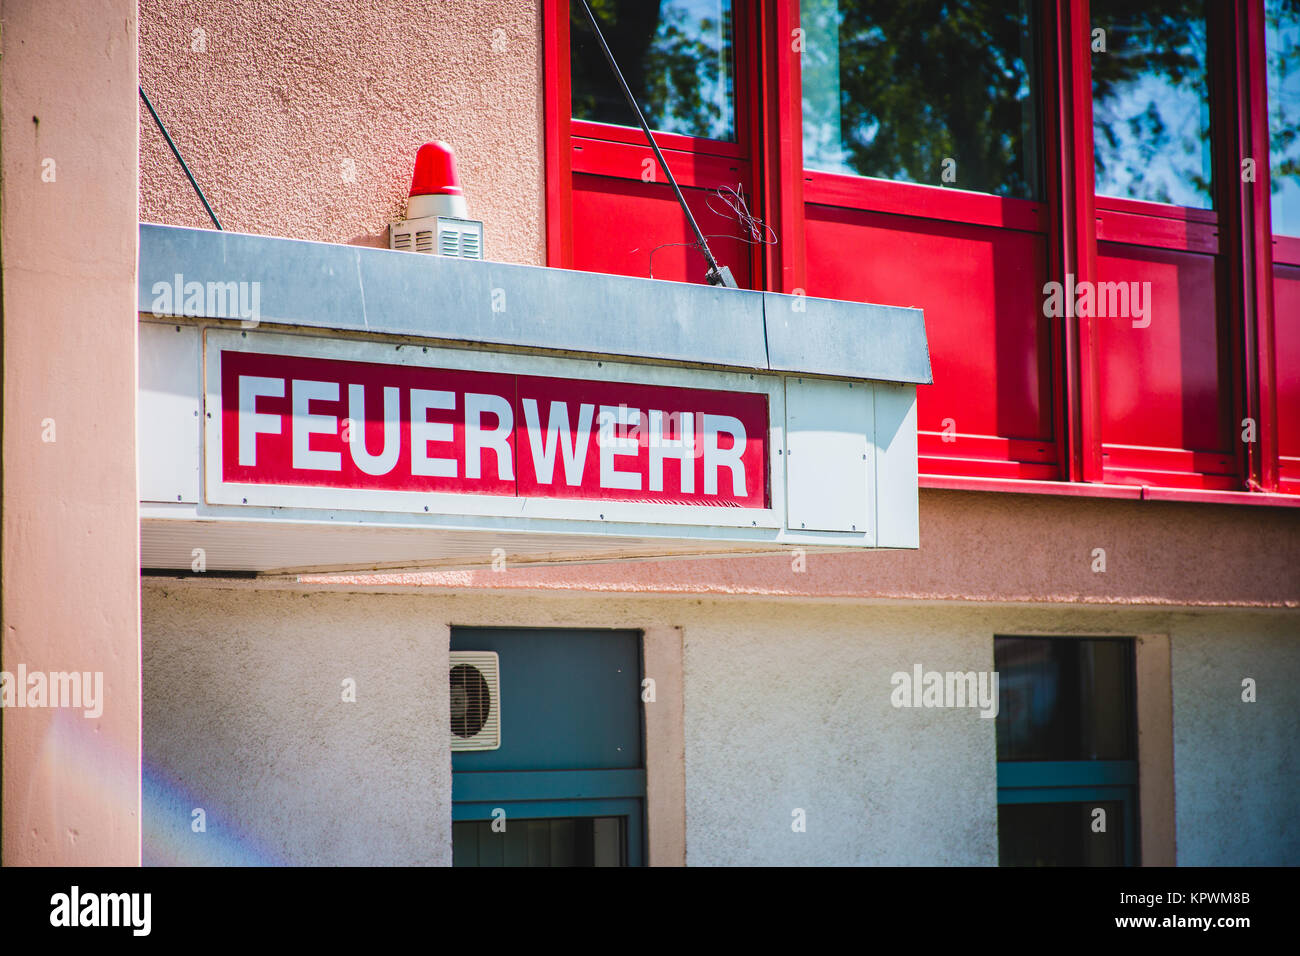 german fire department with red label Feuerwehr Stock Photo